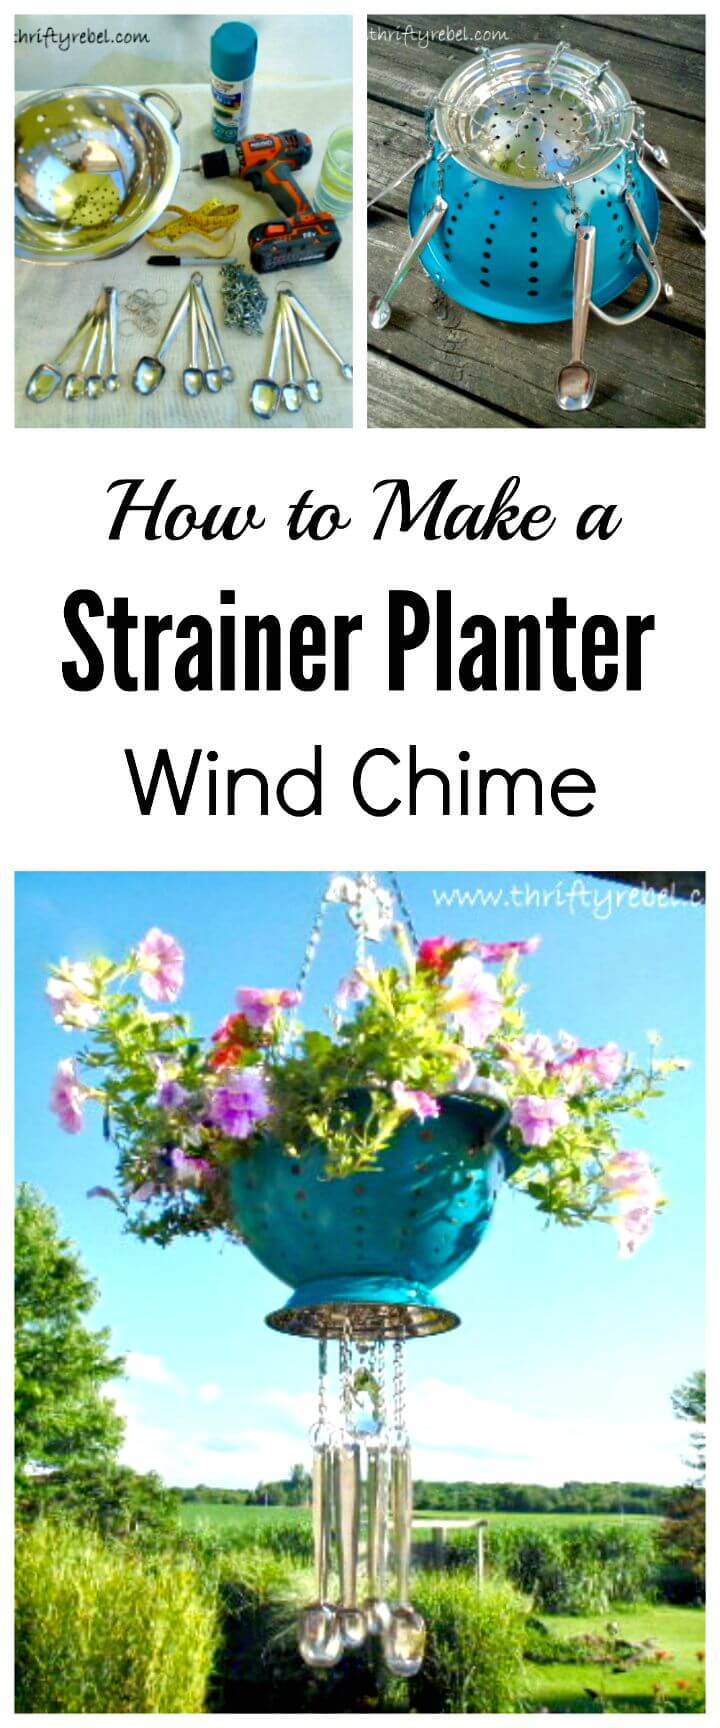 Easy How to Make a Strainer Planter Wind Chime Tutorial